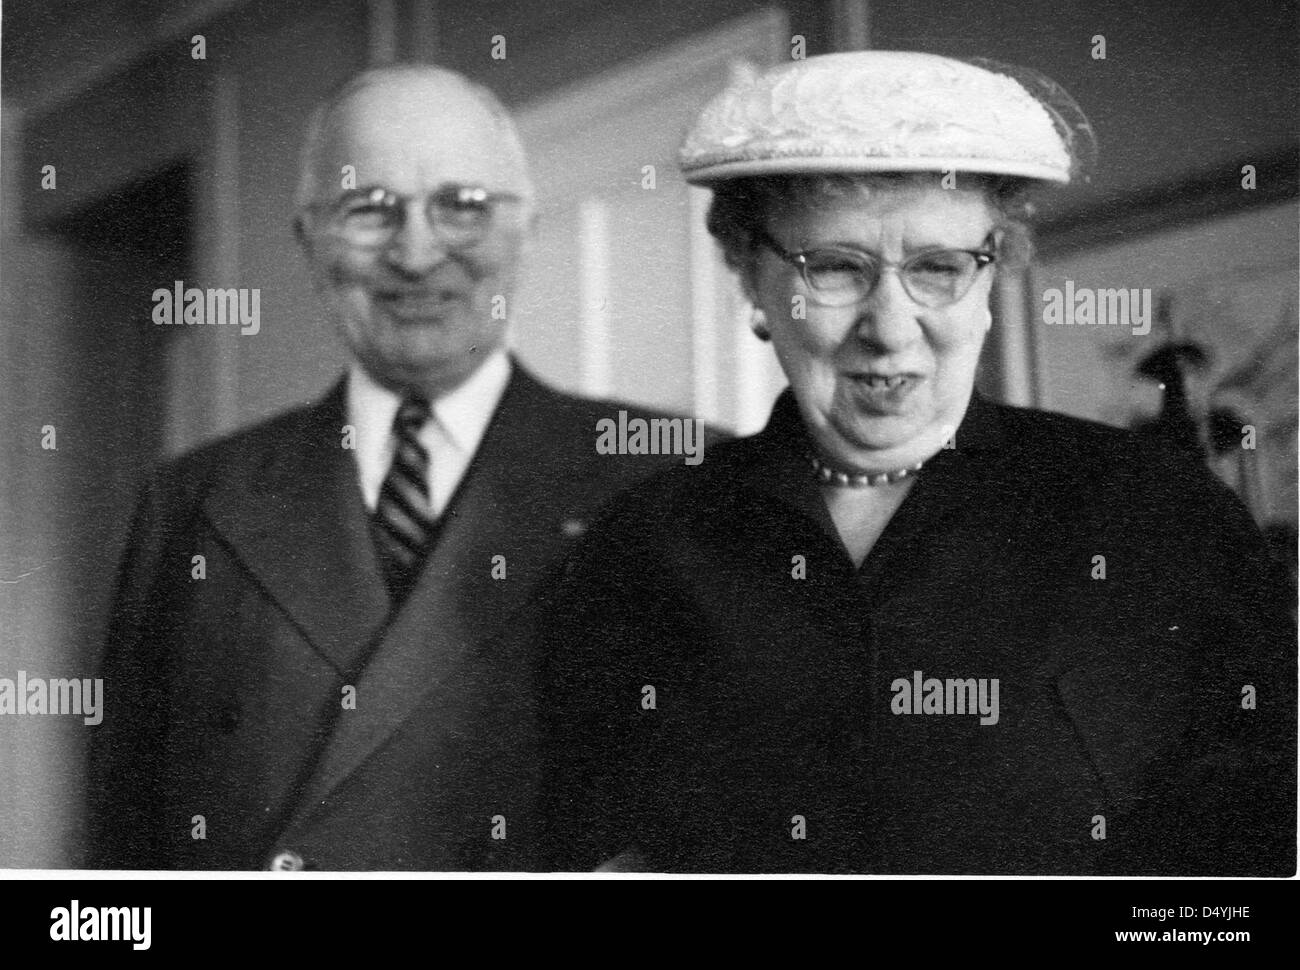 Photograph of Former President Harry S. Truman and Bess Truman, Smiling, ca. 1960 Stock Photo